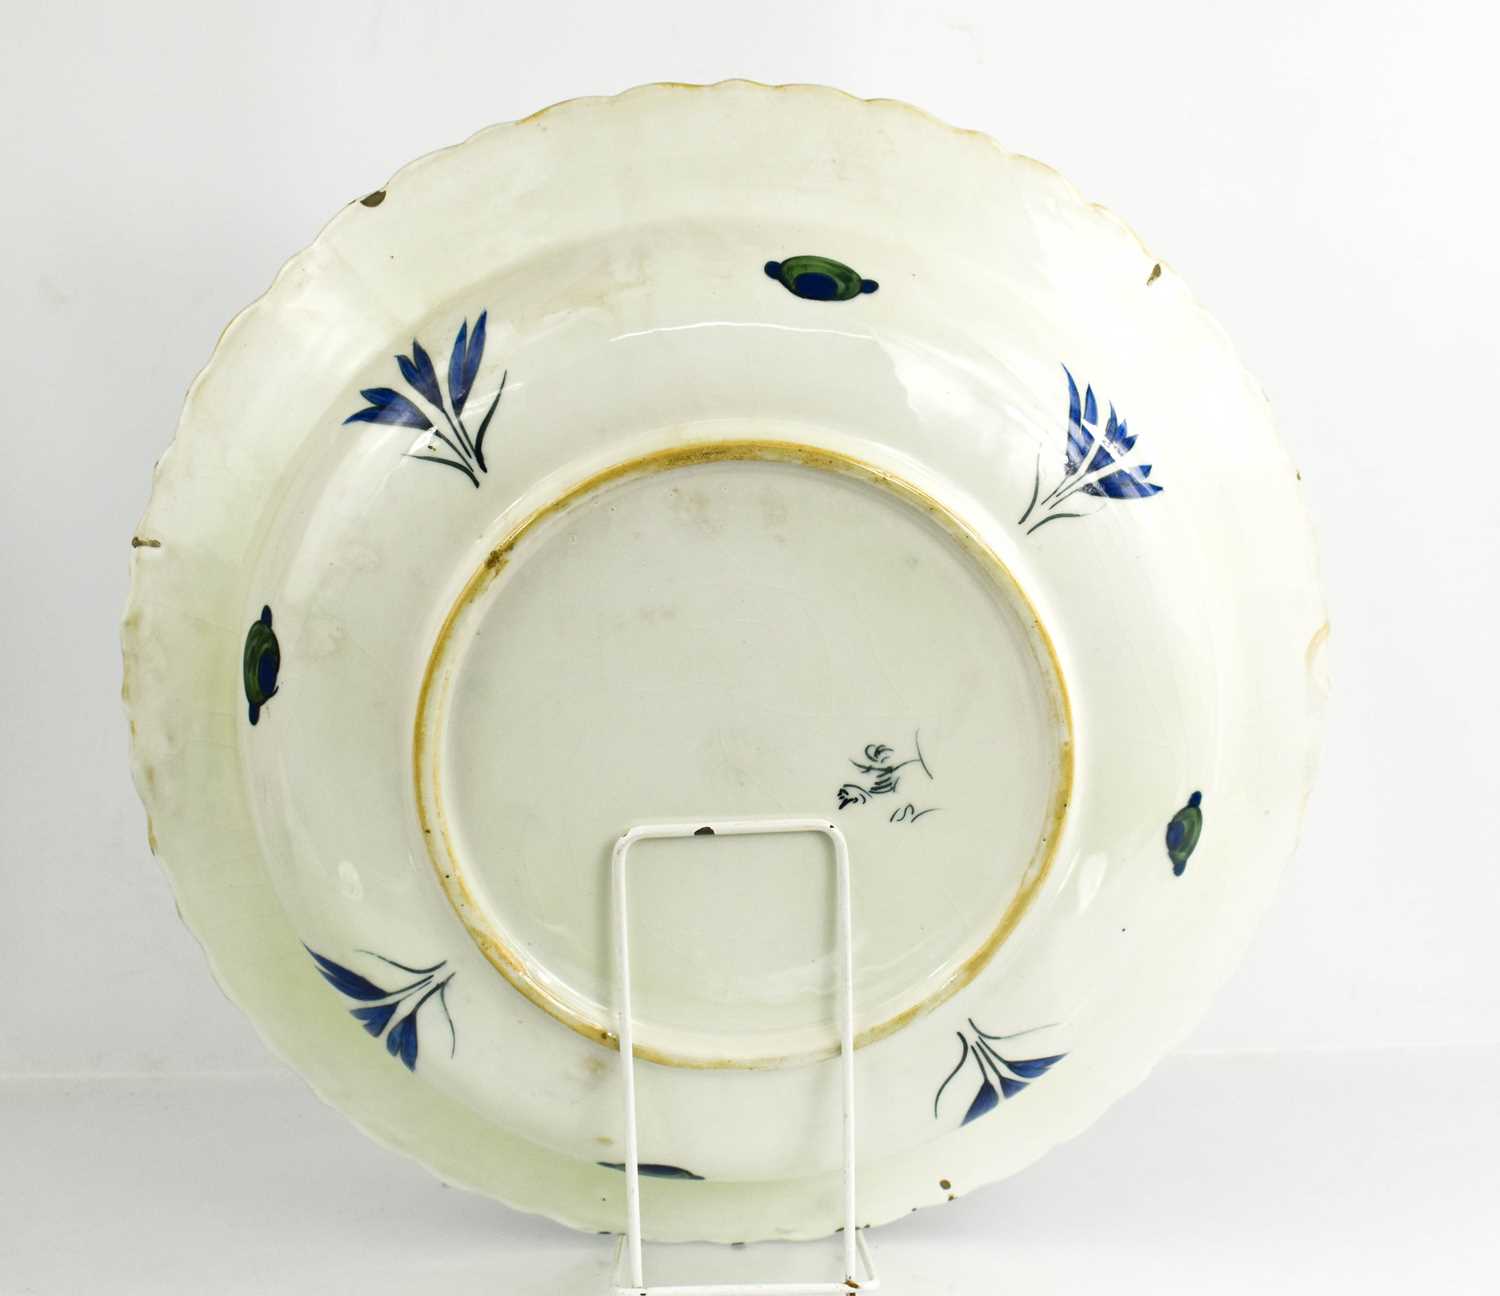 A 19th century Cantagalli Iznik-Style pottery dish, Italy, with scalloped edges, painted in - Image 4 of 4